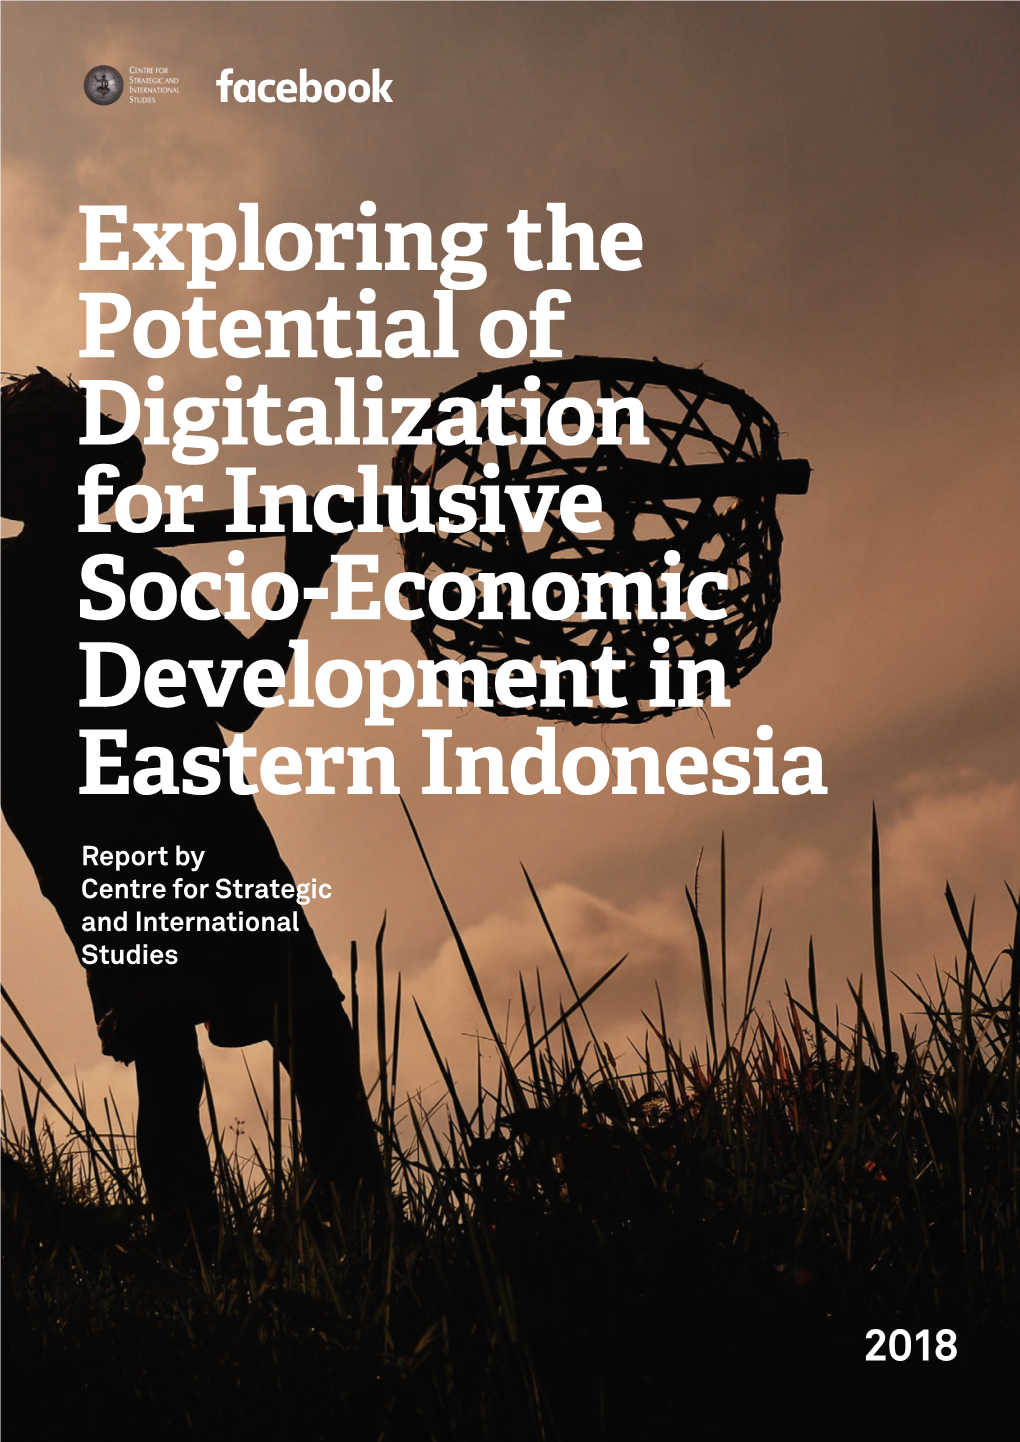 Exploring the Potential of Digitalization for Inclusive Socio-Economic Development in Eastern Indonesia Report by Centre for Strategic and International Studies